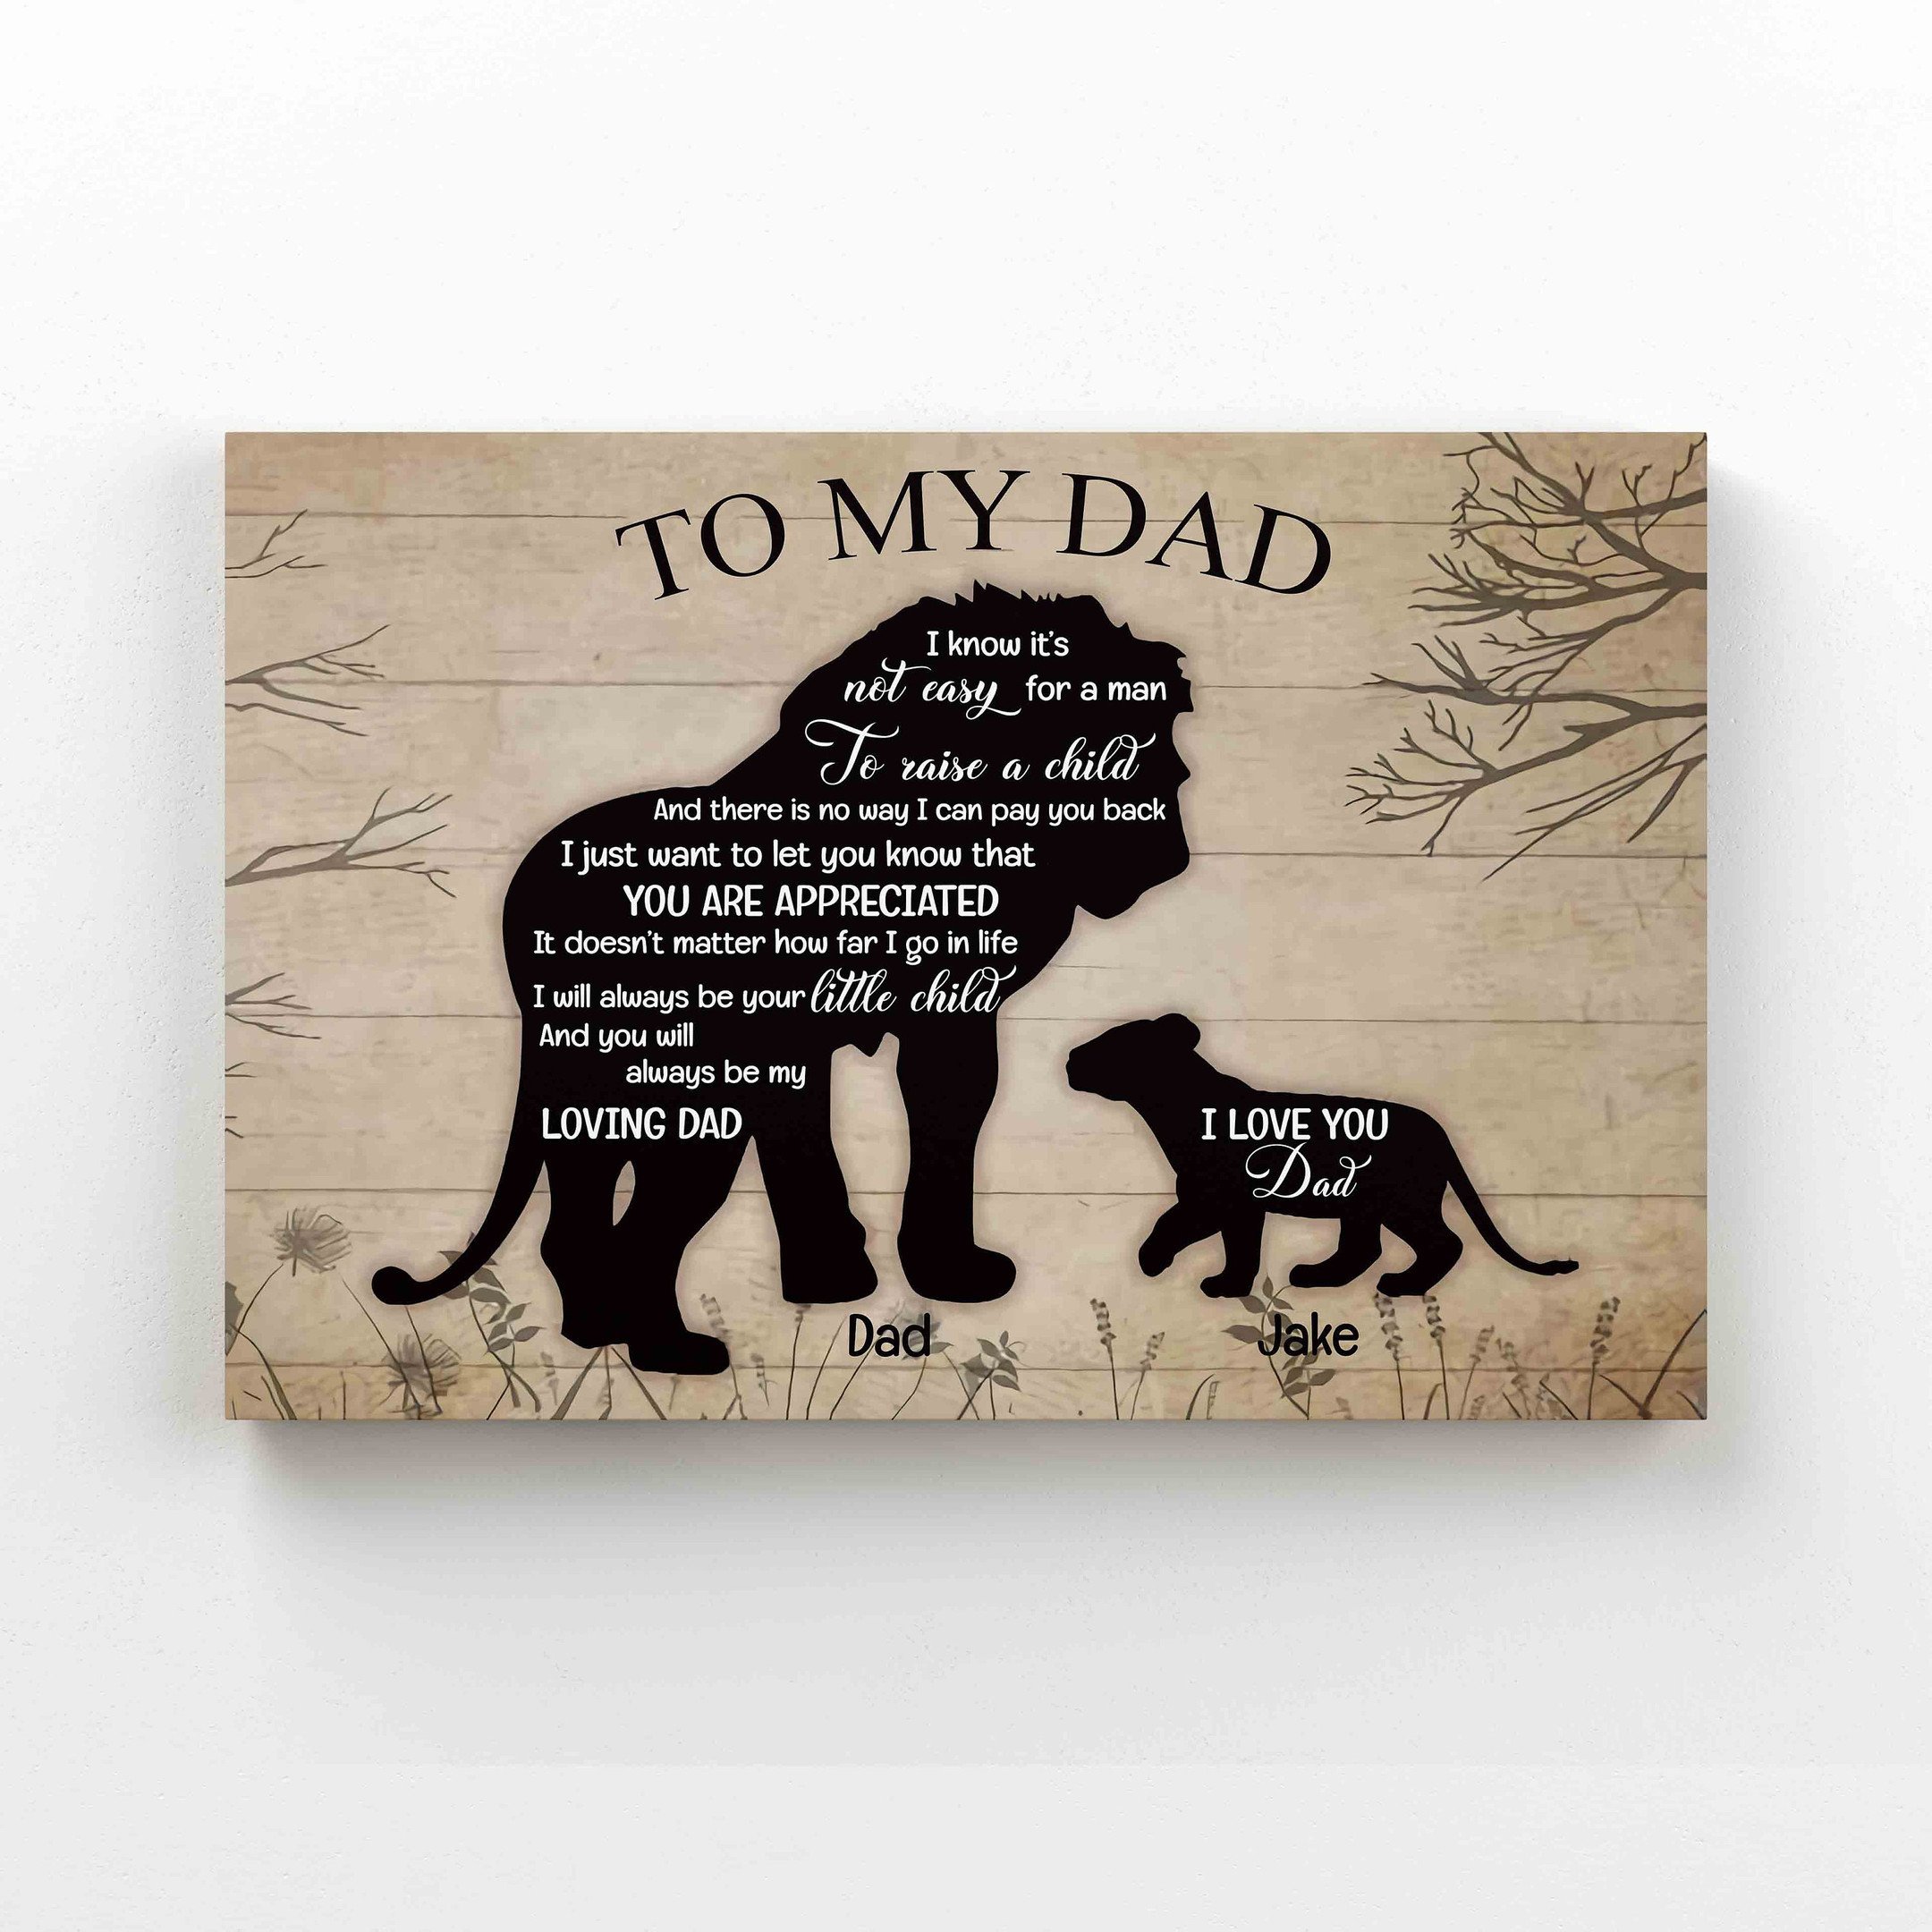 Personalized Name Canvas, To My Dad Canvas, I Love You Dad Canvas – Canvas Prints, Gift Canvas, Family Canvas, Wall Art Canvas